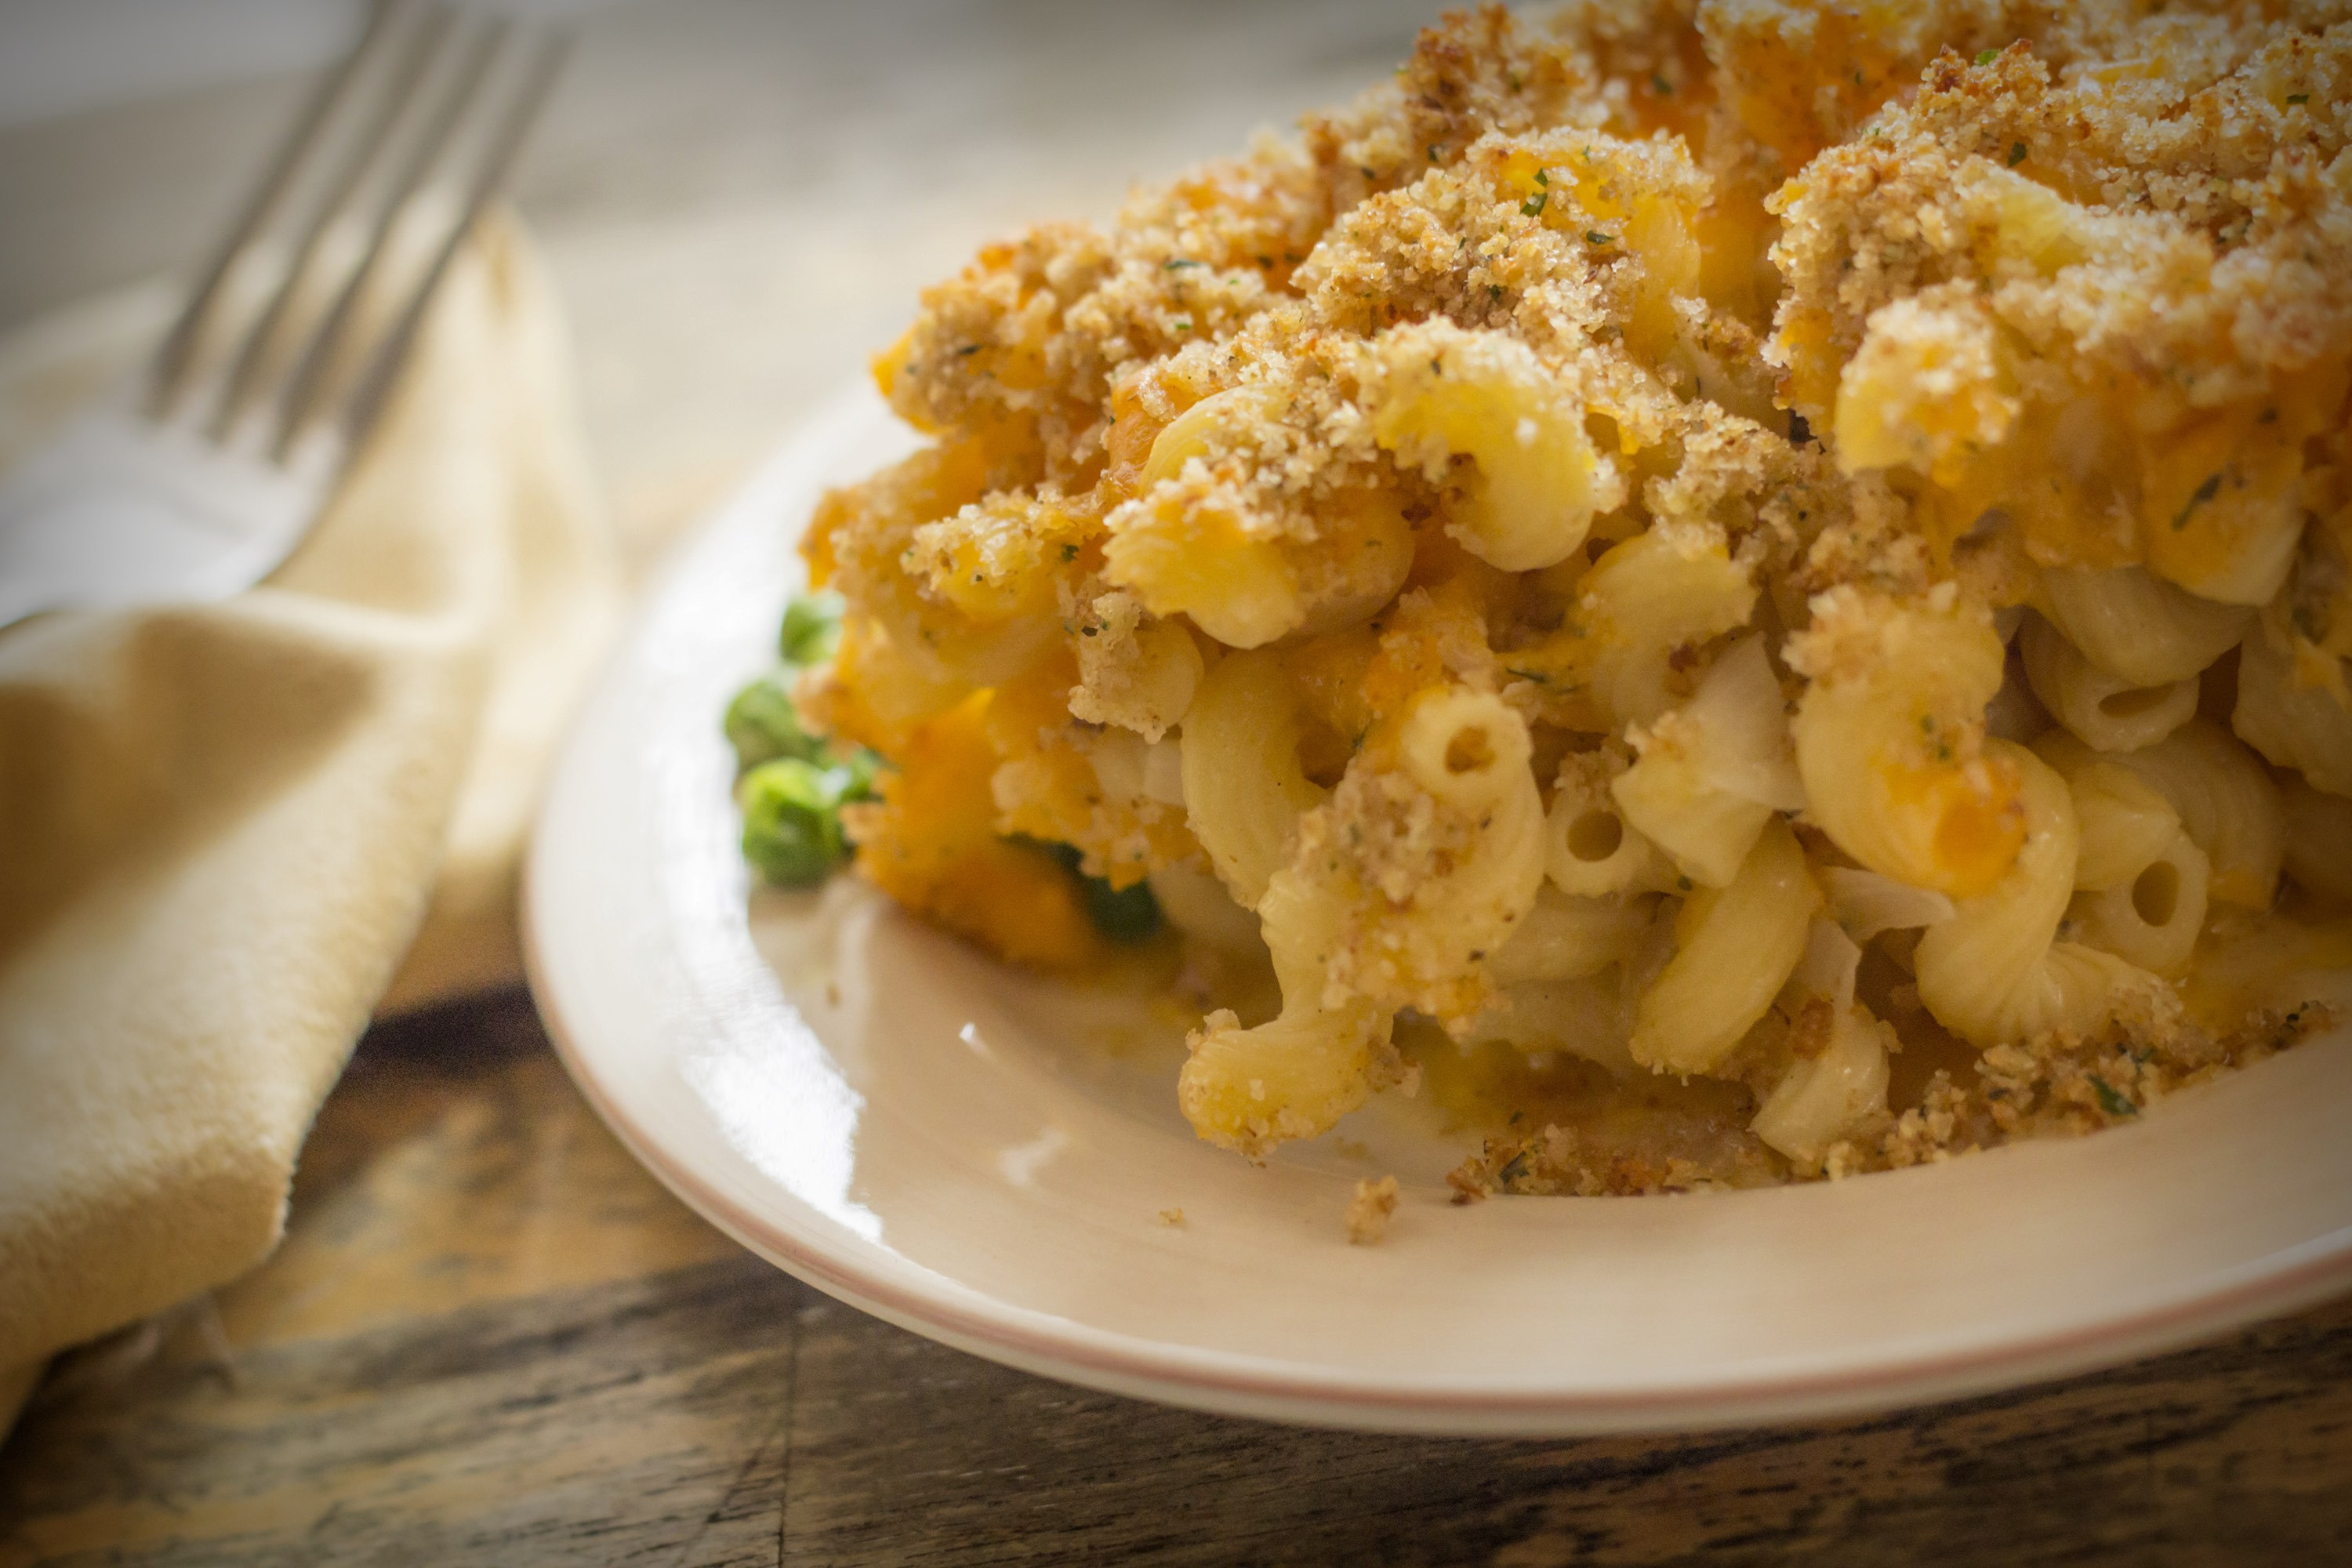 Home made baked macaroni and cheese with crispy breadcrumb topping.